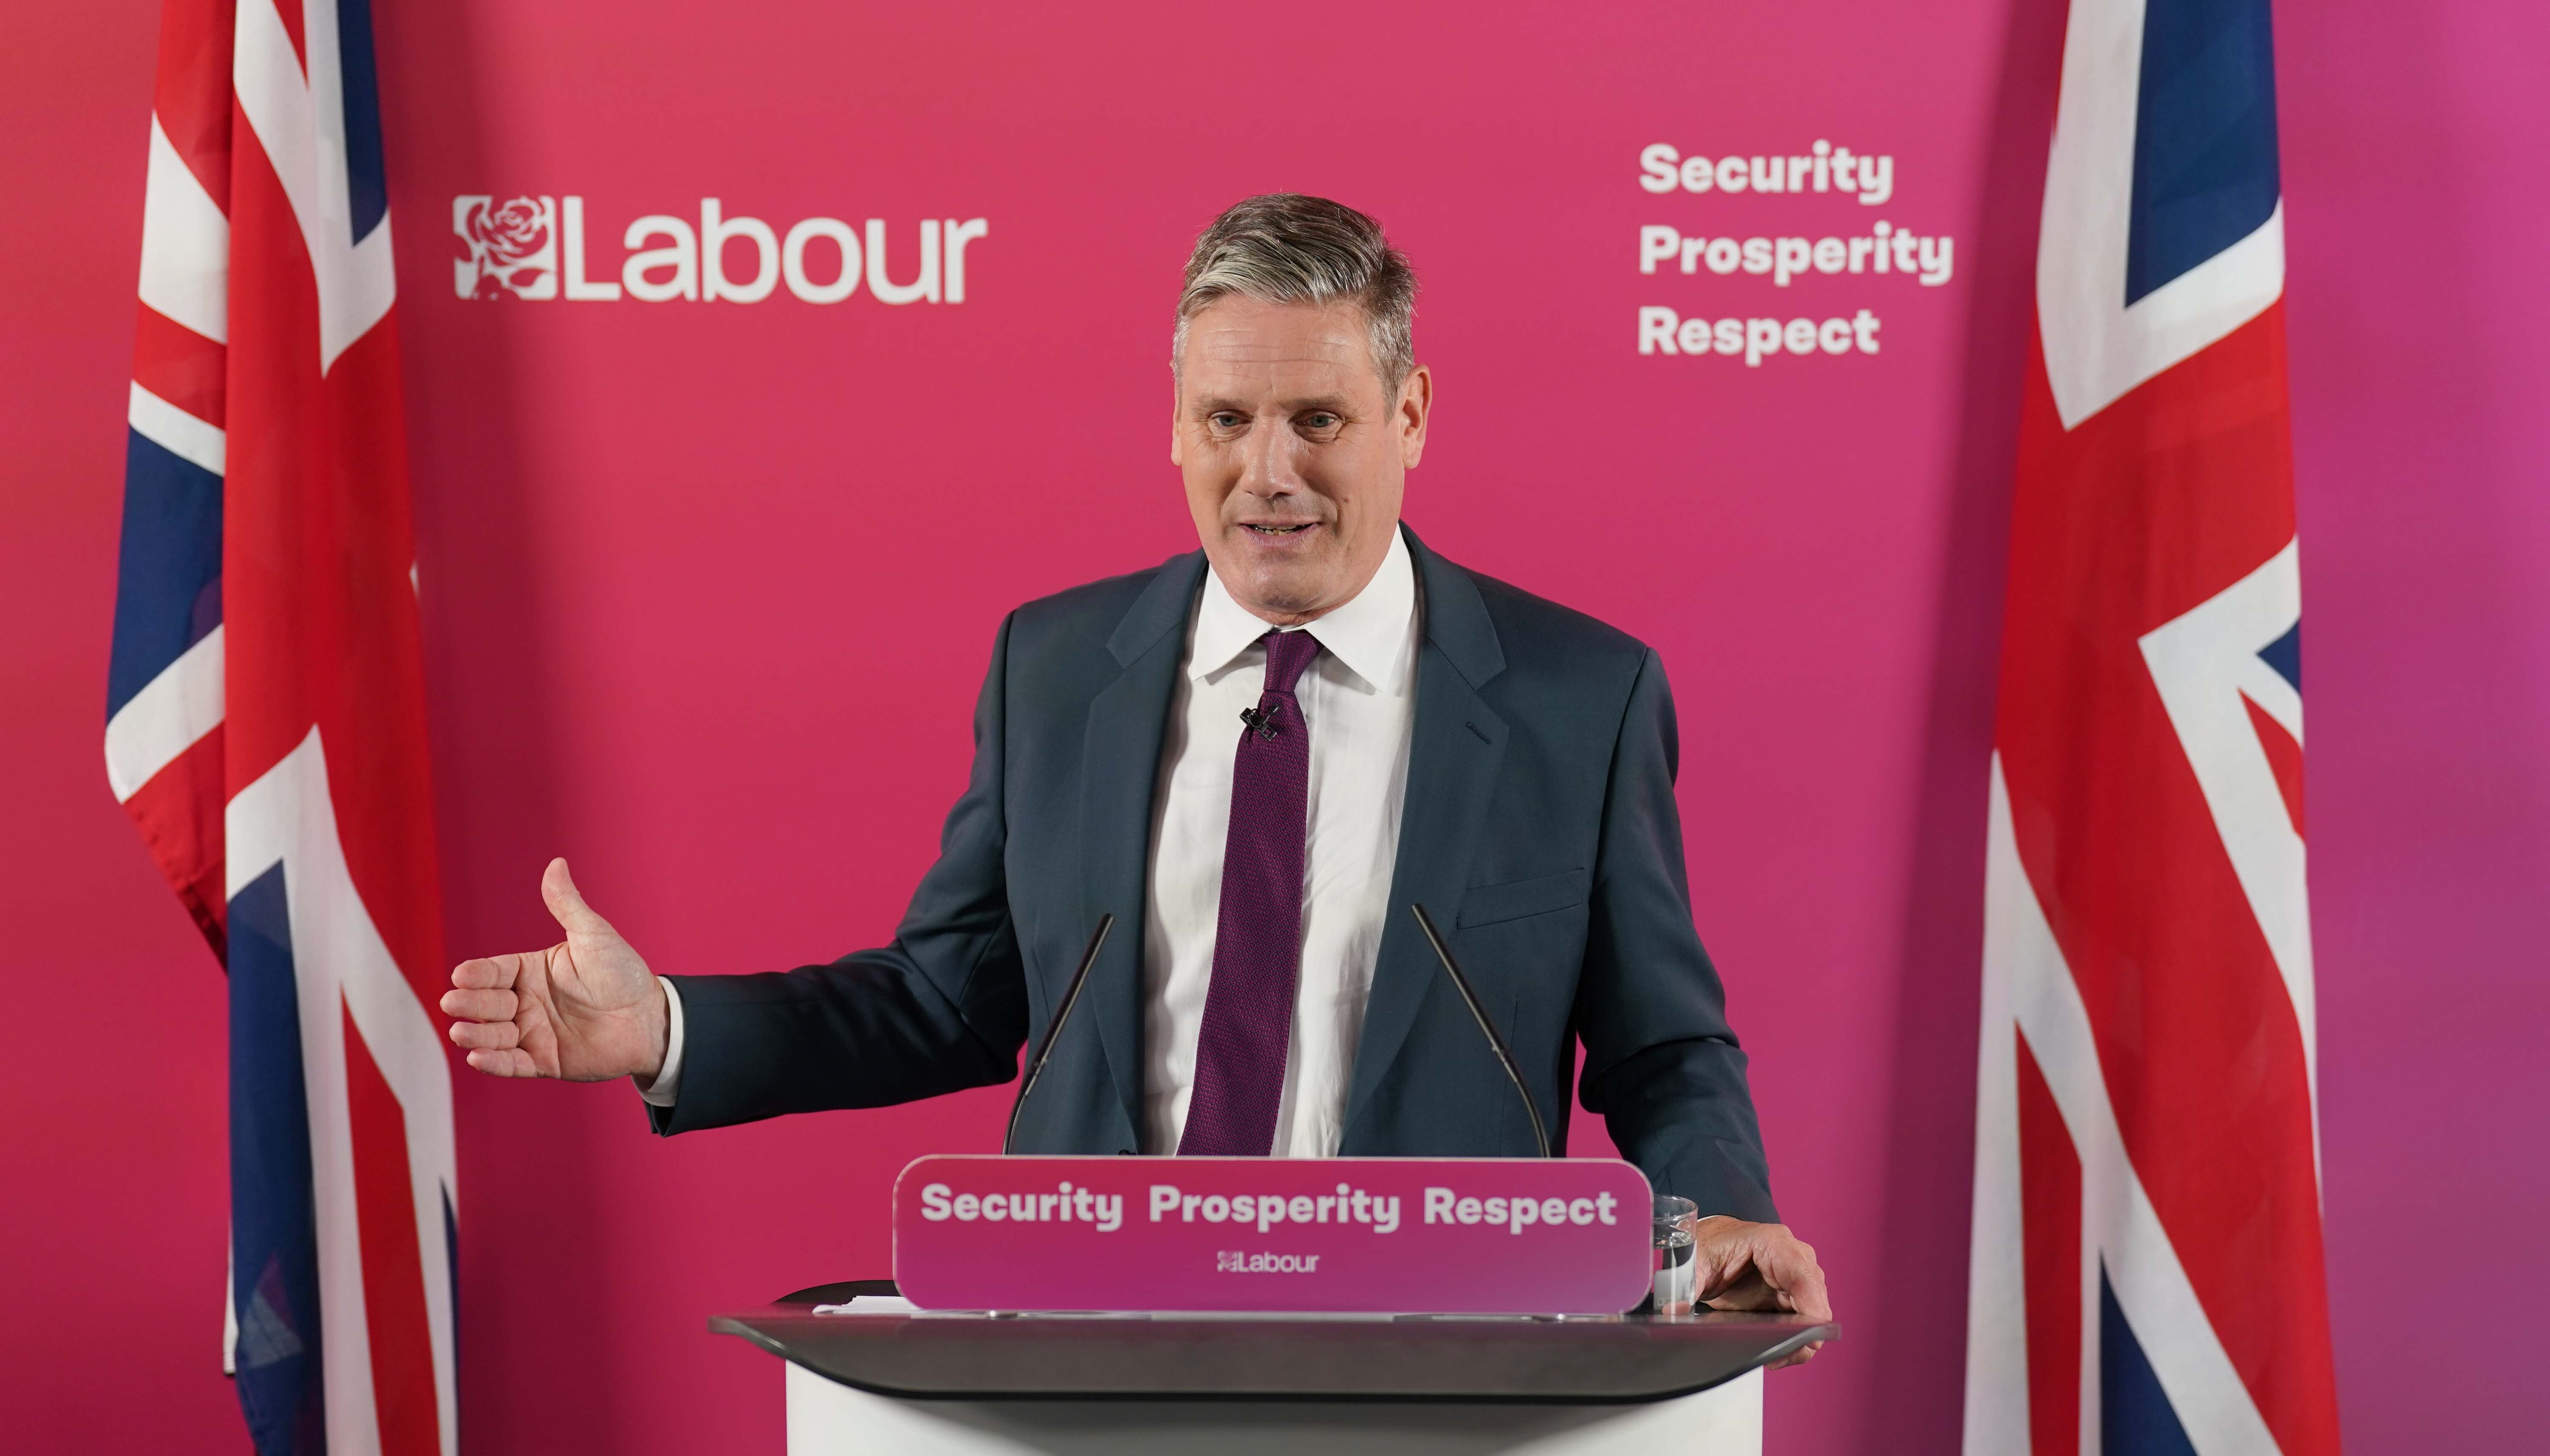 Labour leader Sir Keir Starmer initiated the vote of no confidence idea following the resignation of Mr Johnson